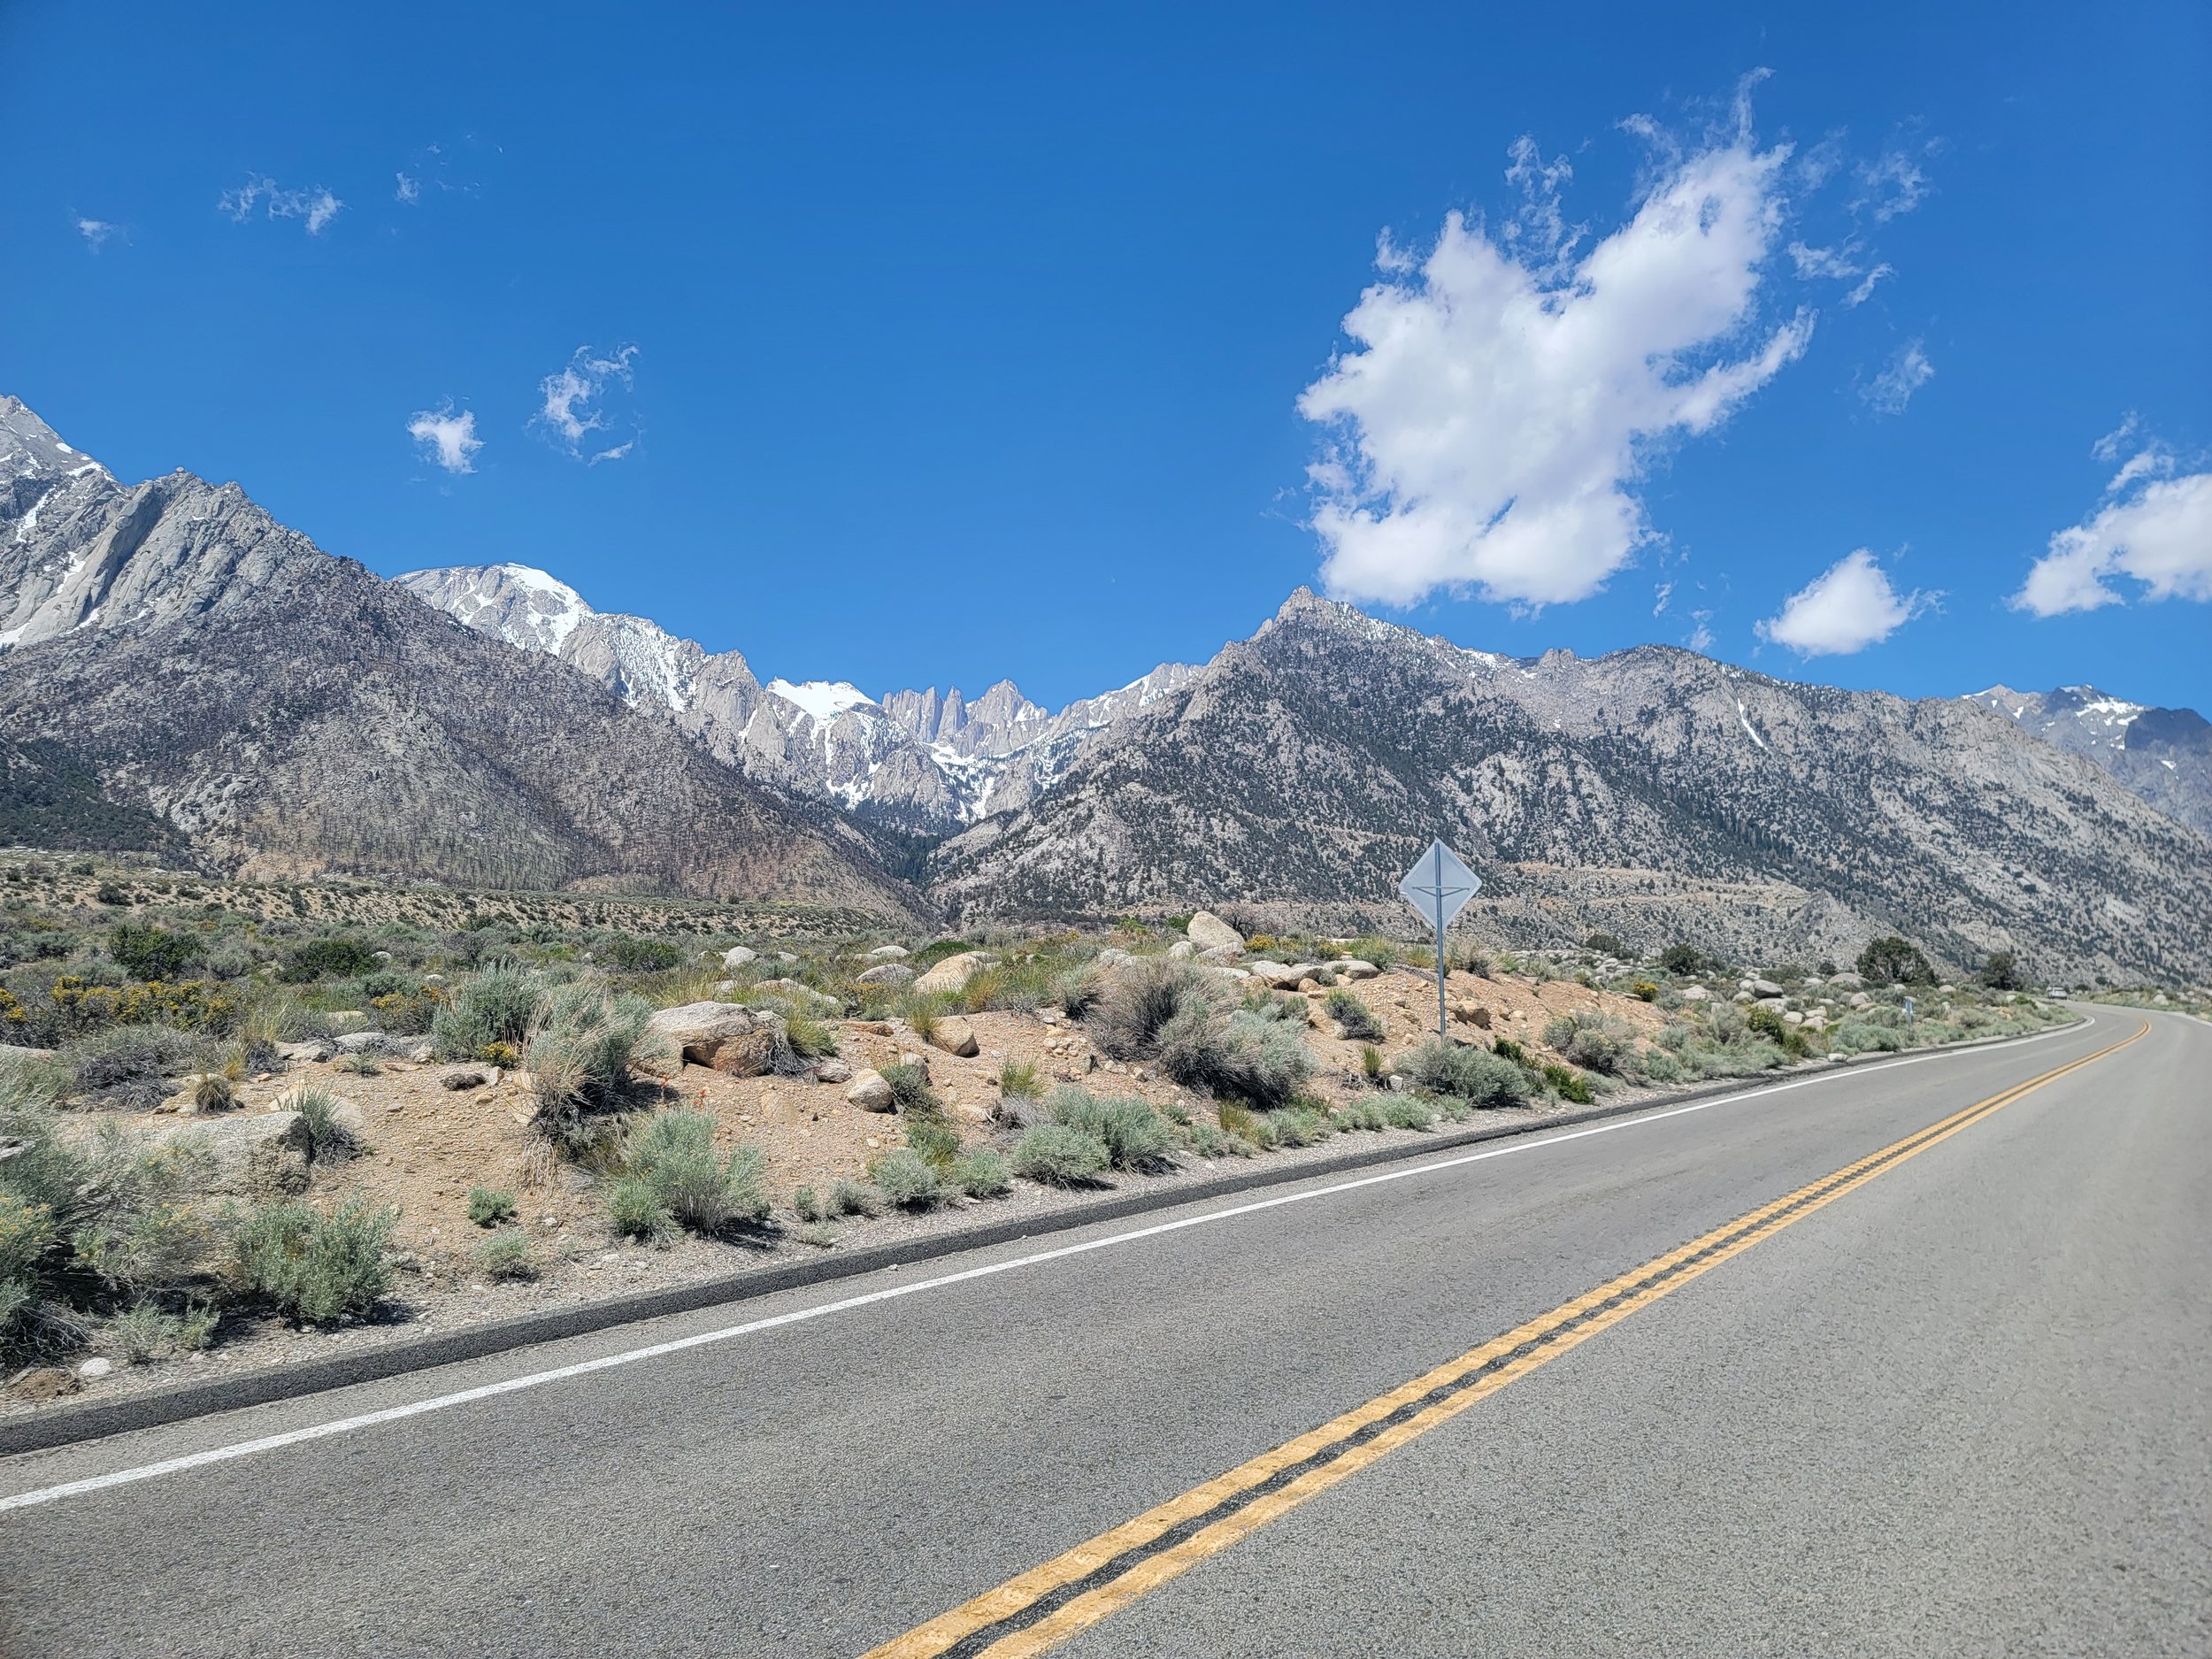 This climb takes you to the "base" of Mount Whitney ( highest point in Continental US ) where people start the hike to the top.